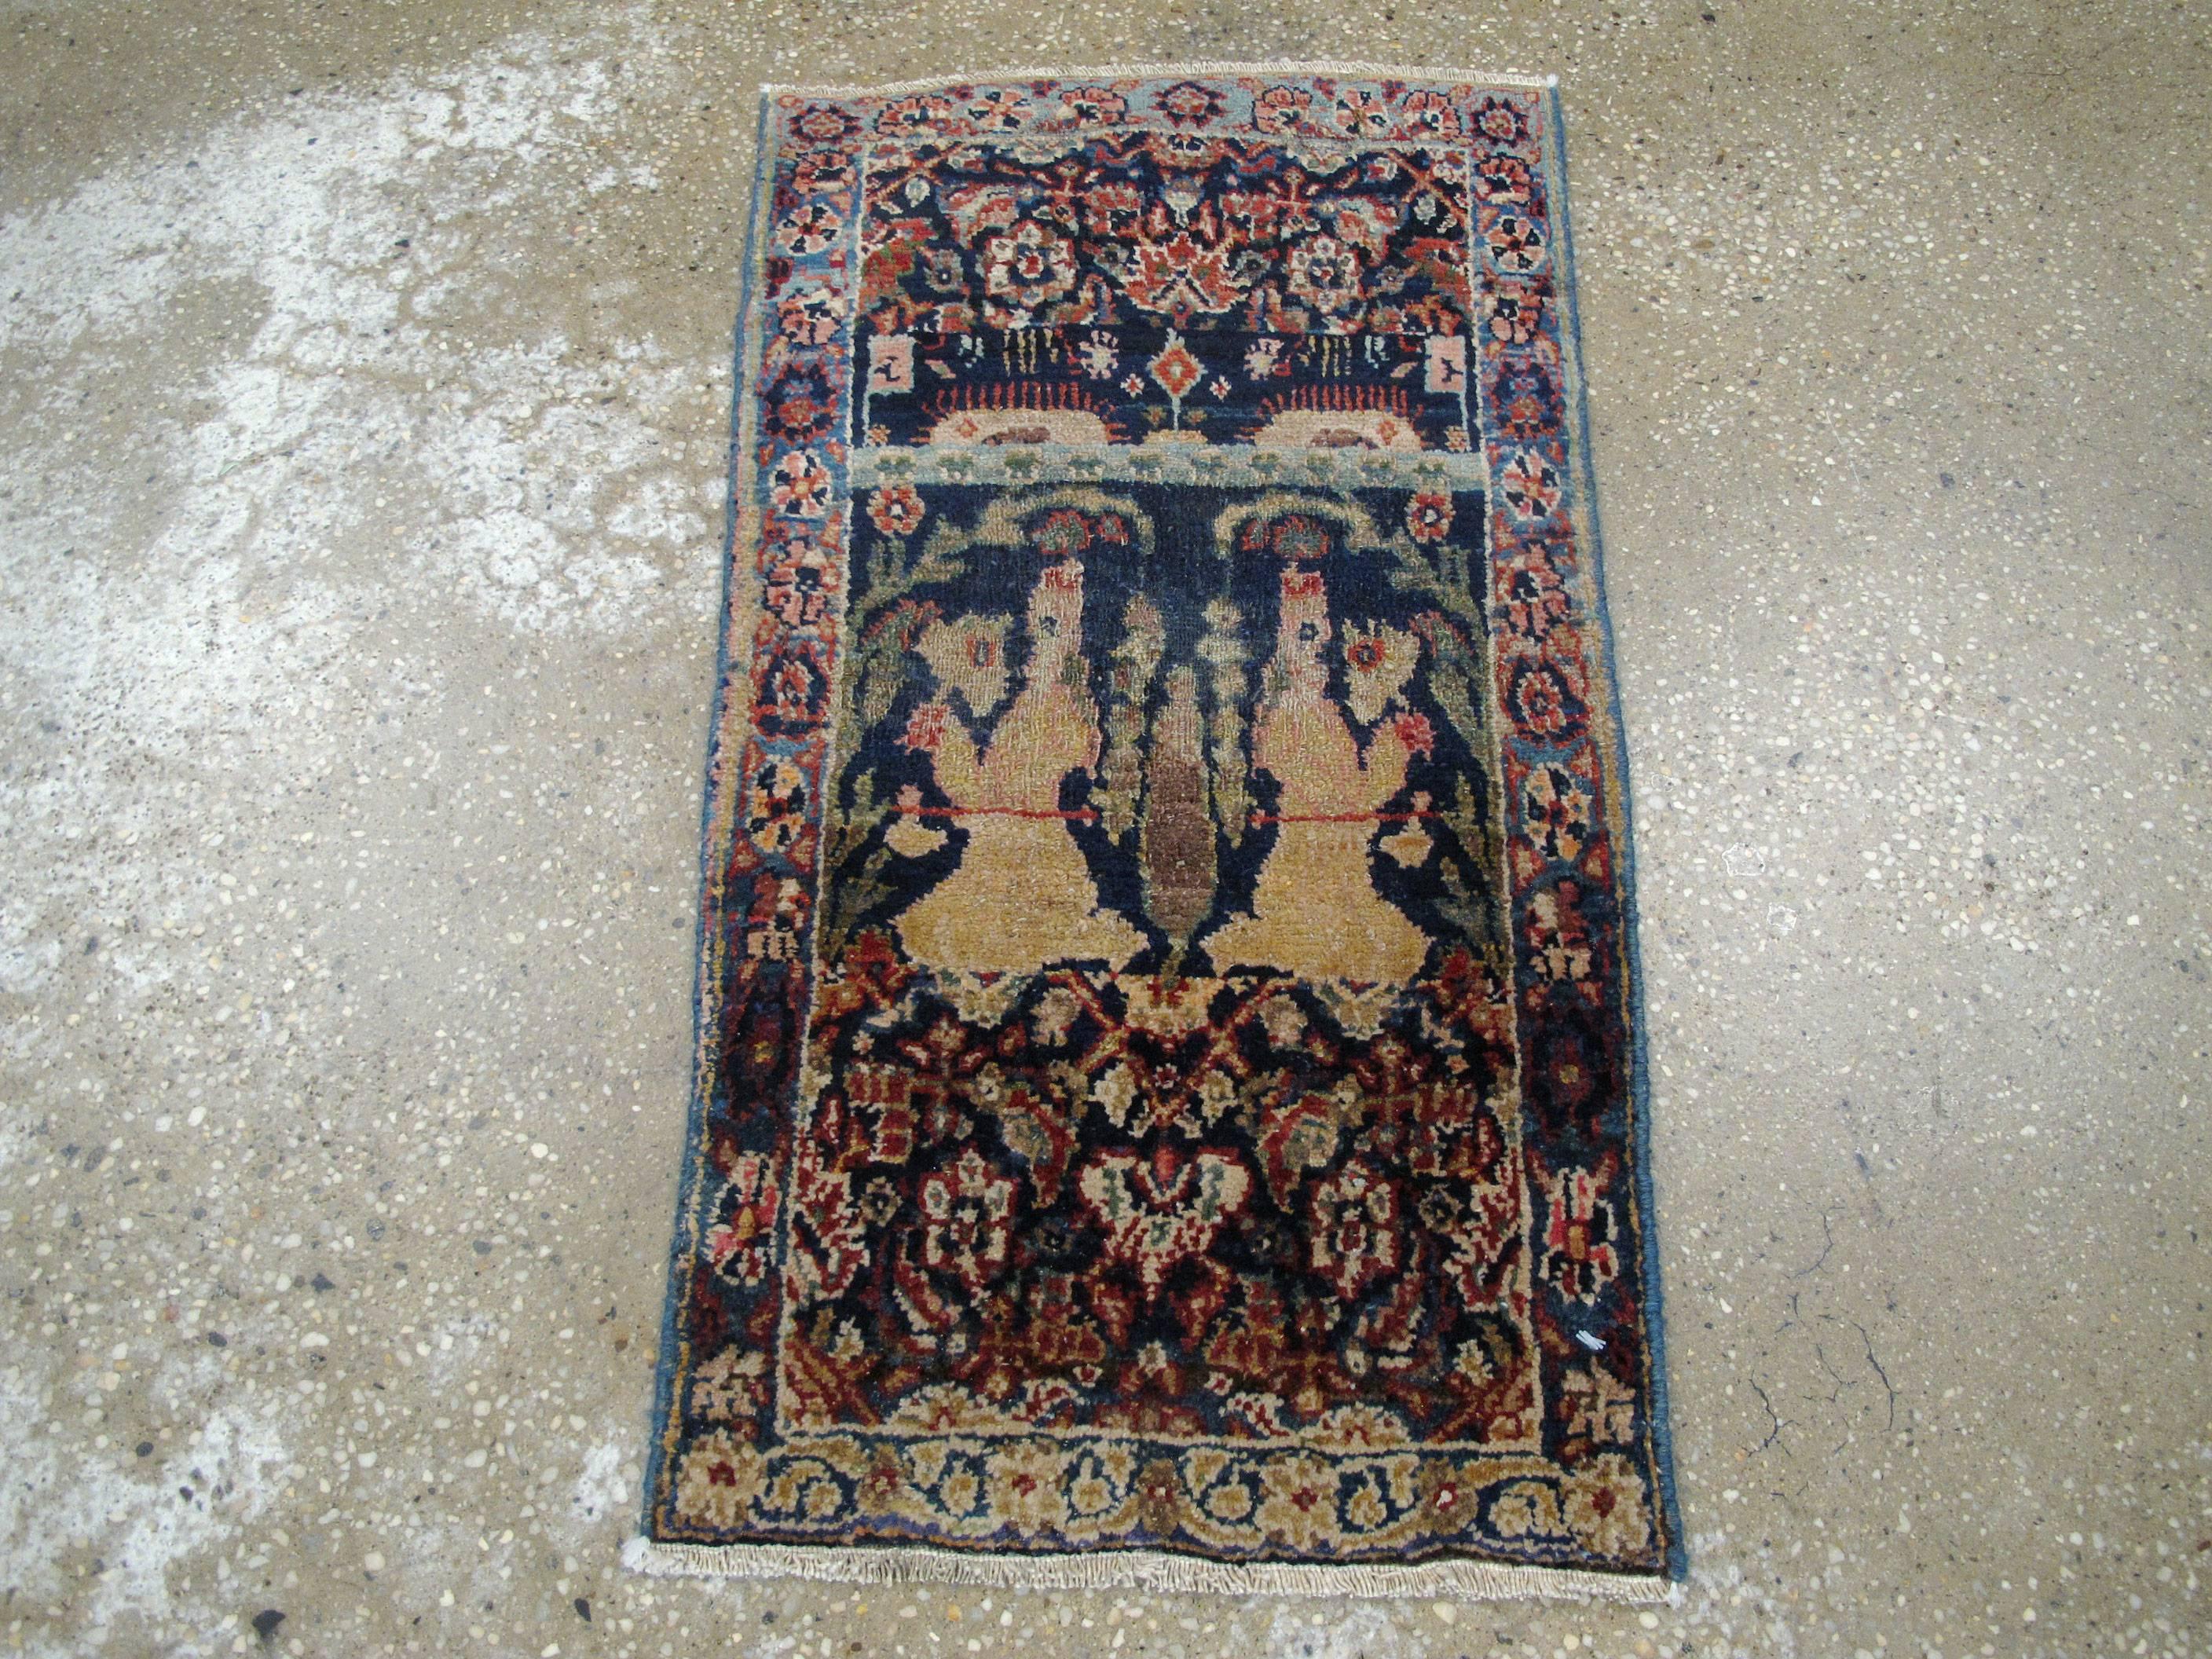 A vintage Persian pictorial Tabriz rug from the mid-20th century.